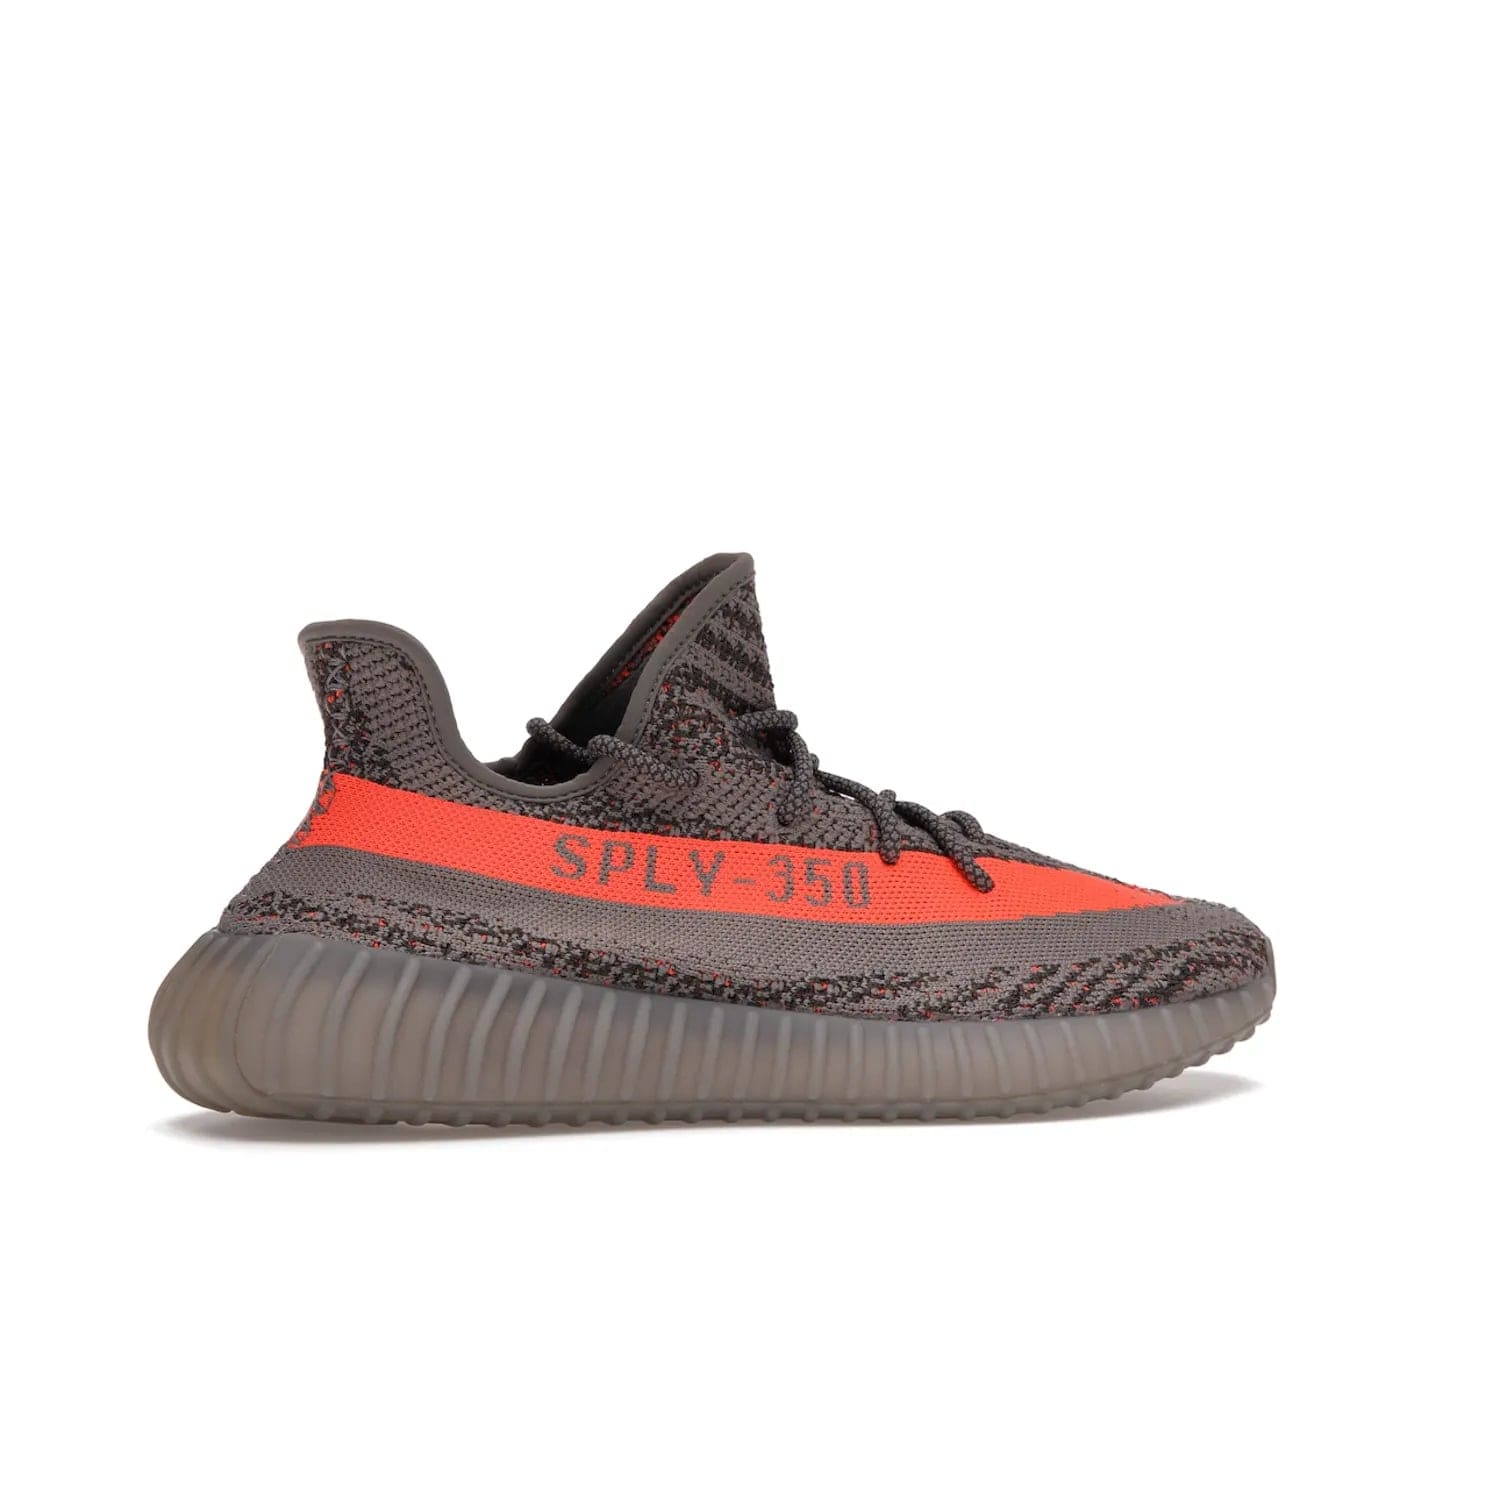 adidas Yeezy Boost 350 V2 Beluga Reflective - Image 35 - Only at www.BallersClubKickz.com - Shop the adidas Yeezy Boost 350 V2 Beluga Reflective: a stylish, reflective sneaker that stands out. Featuring Boost sole, Primeknit upper & signature orange stripe. Available Dec 2021.